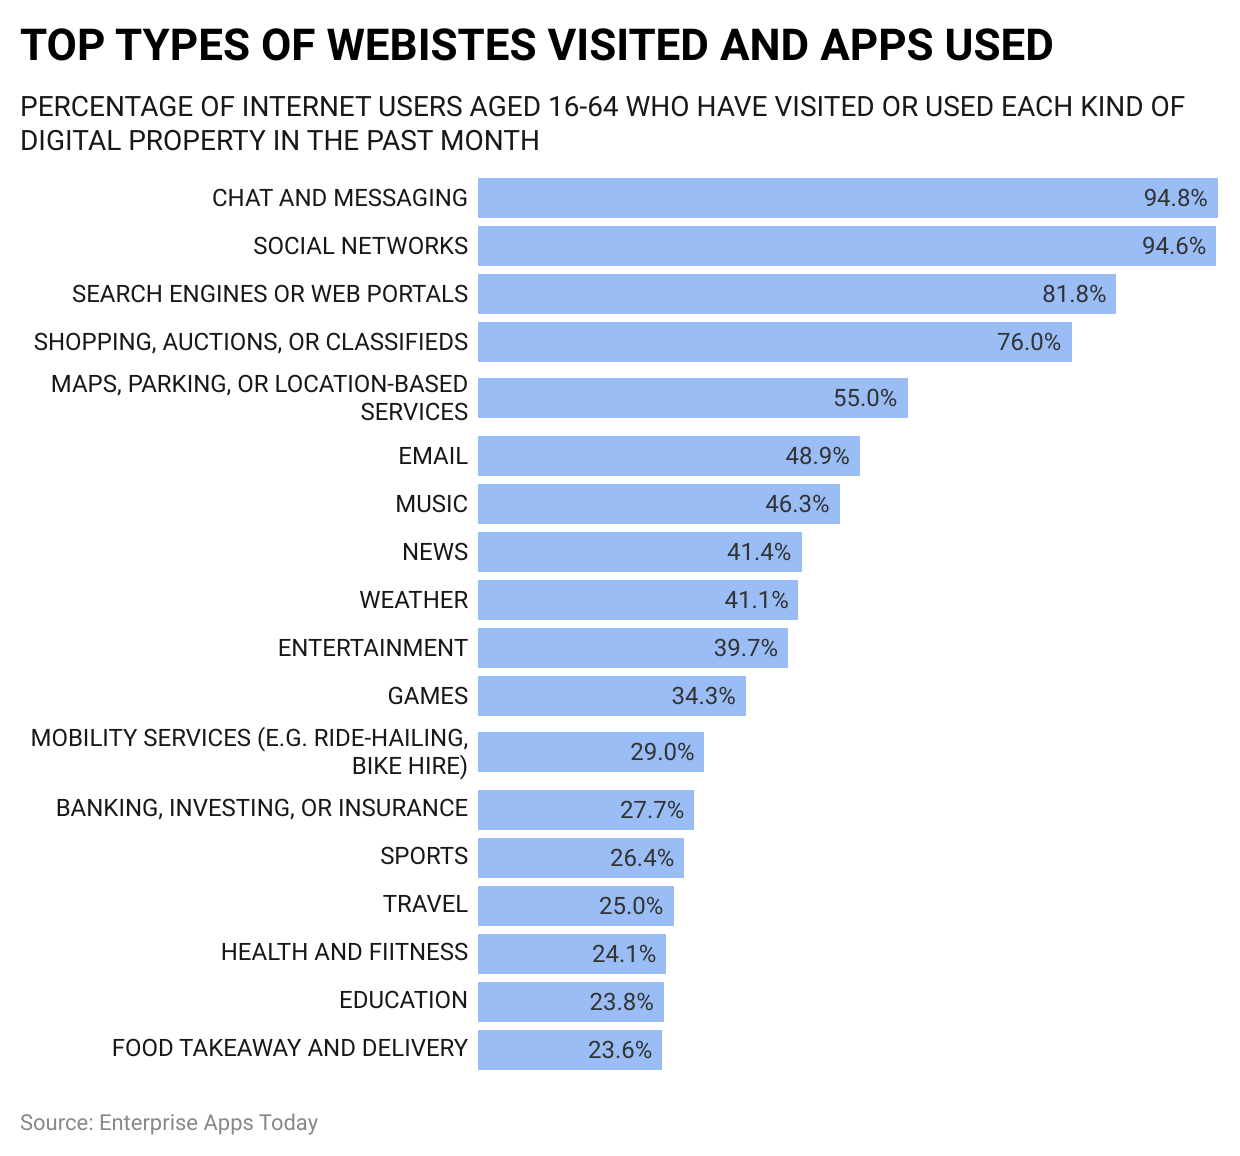 Digital Footprint Statistics by types of websites and apps used